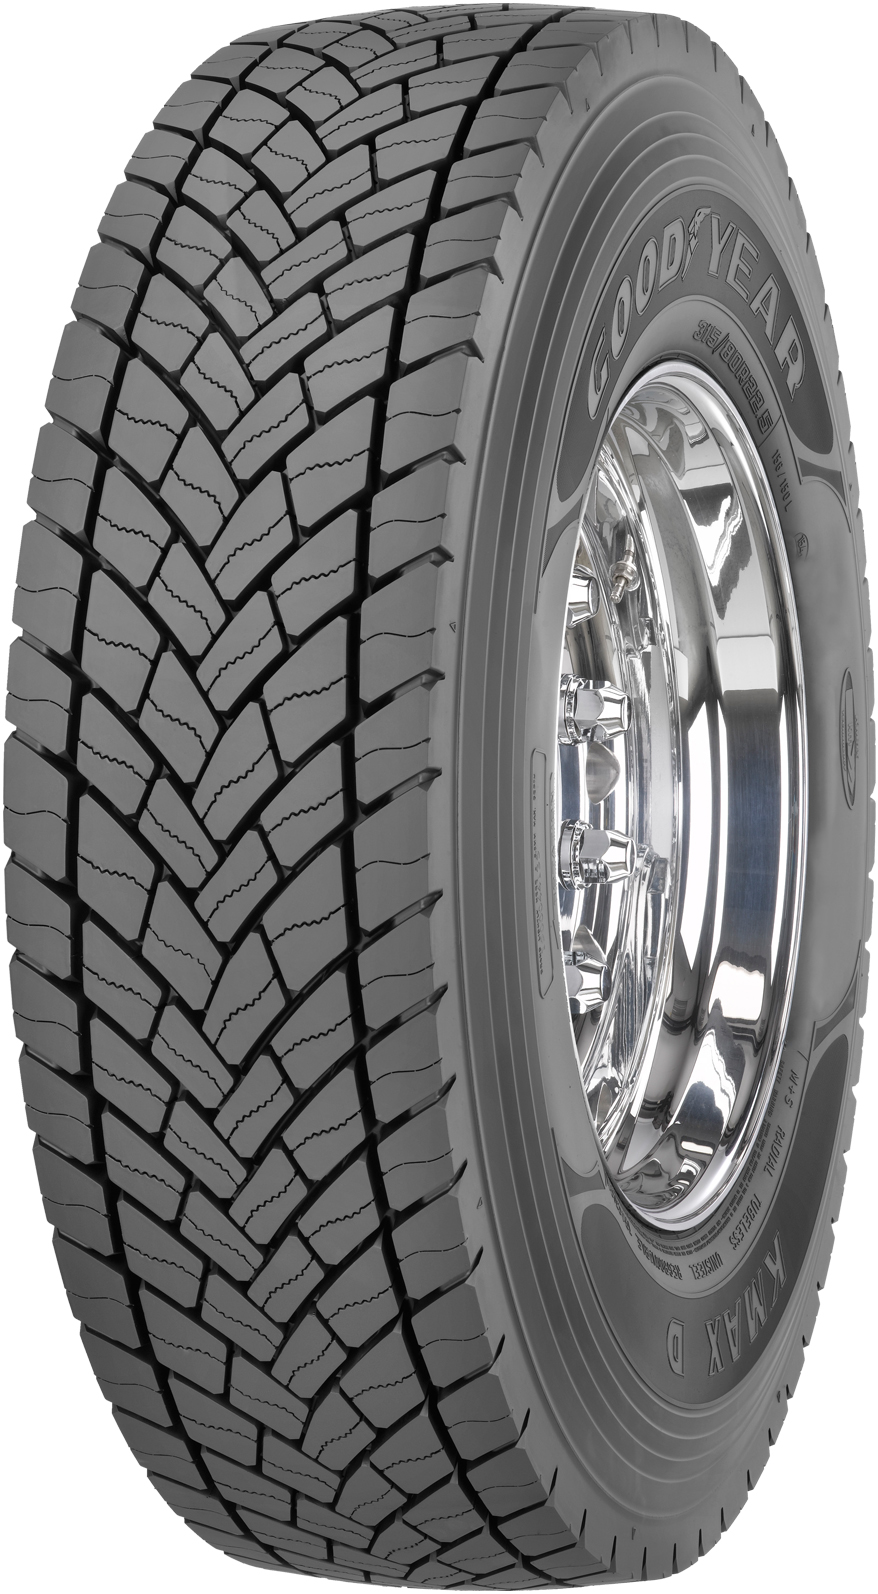 product_type-heavy_tires GOODYEAR KMAX D 16 TL 245/70 R17.5 136M